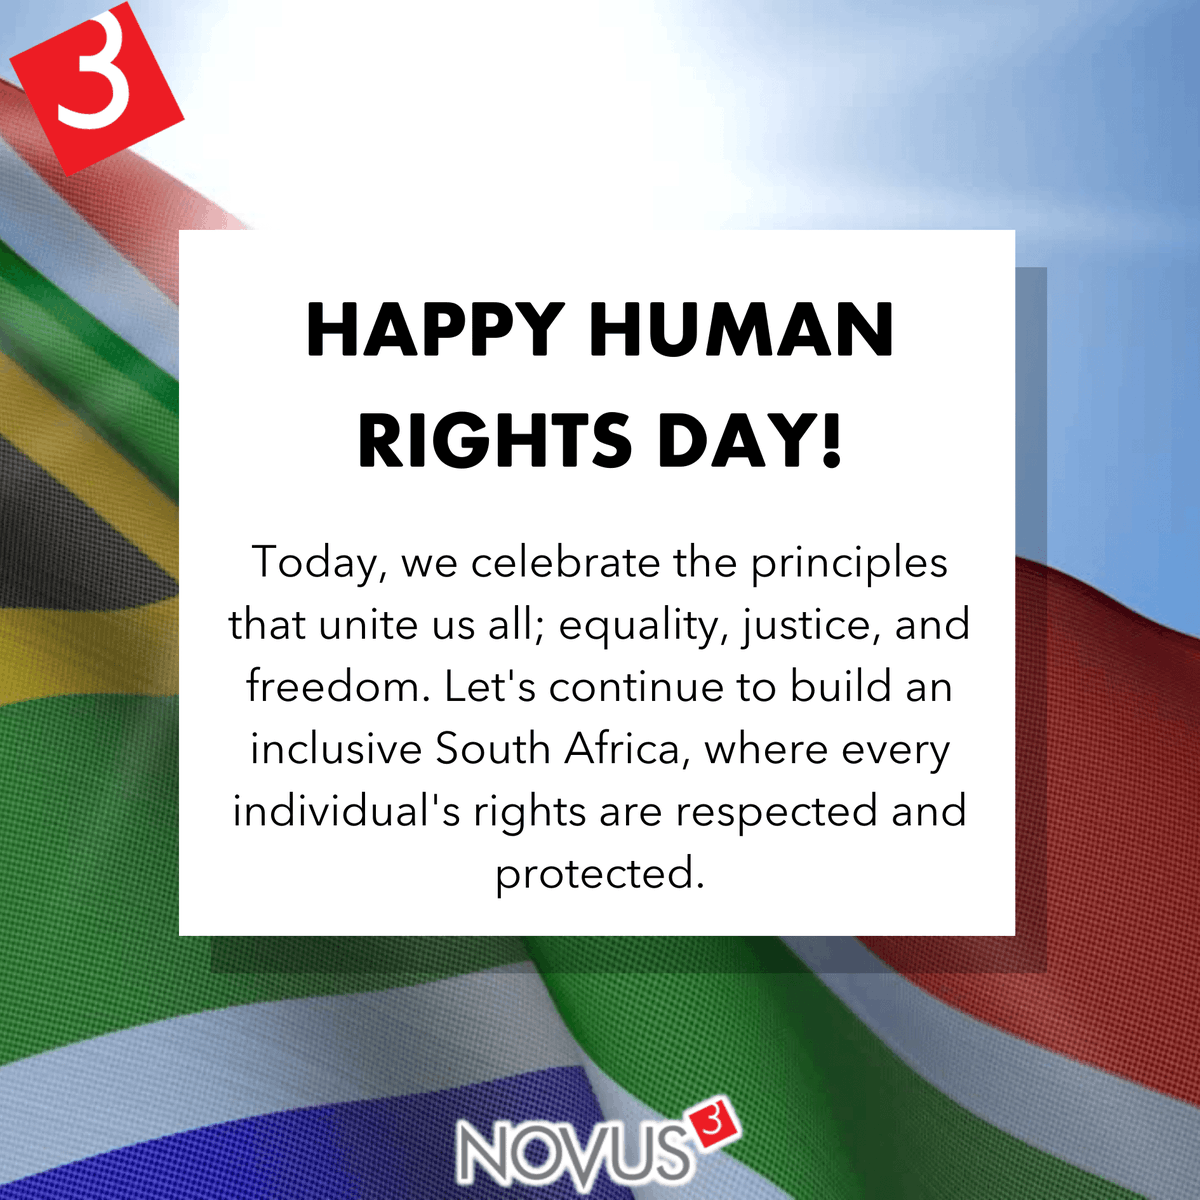 Happy Human Rights Day!
Today, we celebrate the principles that unite us all; equality, justice, and freedom. Let’s continue to build an inclusive South Africa, where every individual’s rights are respected and protected. #Novus3 #HumanRightsDay #EqualityForAll #MakingADiffere...